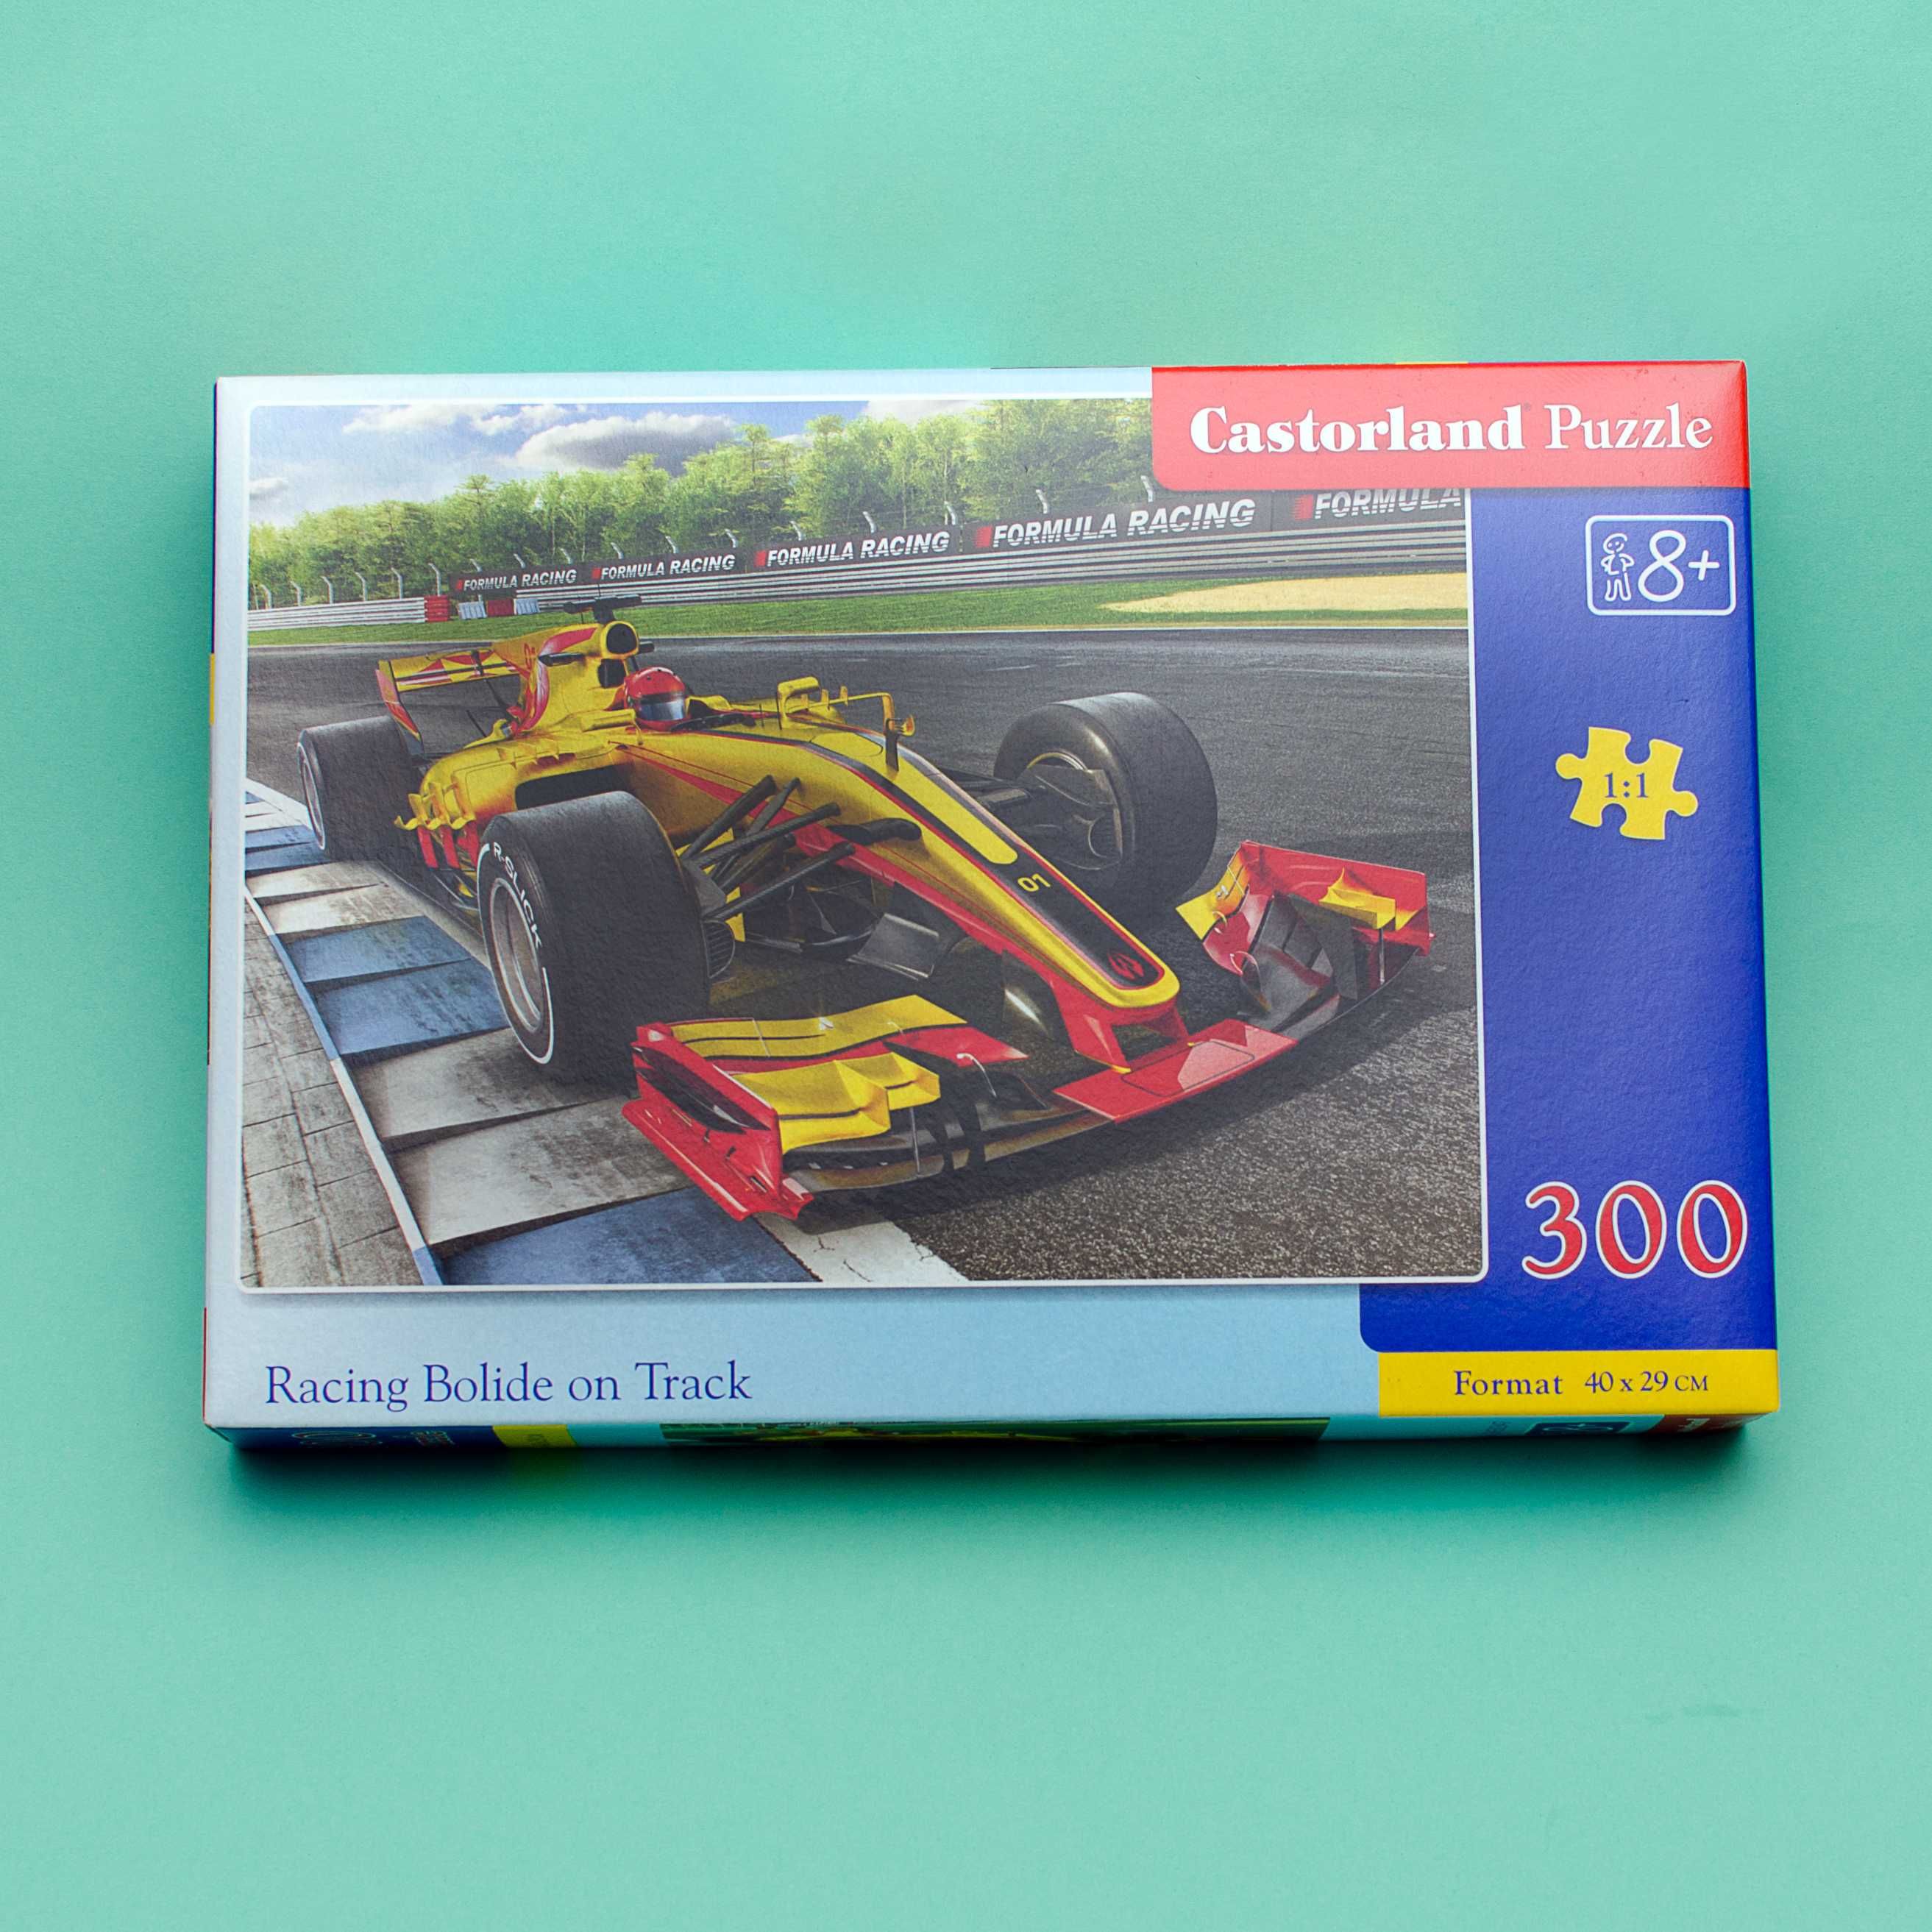 Castorland Puzzle - Racing Bolide on track